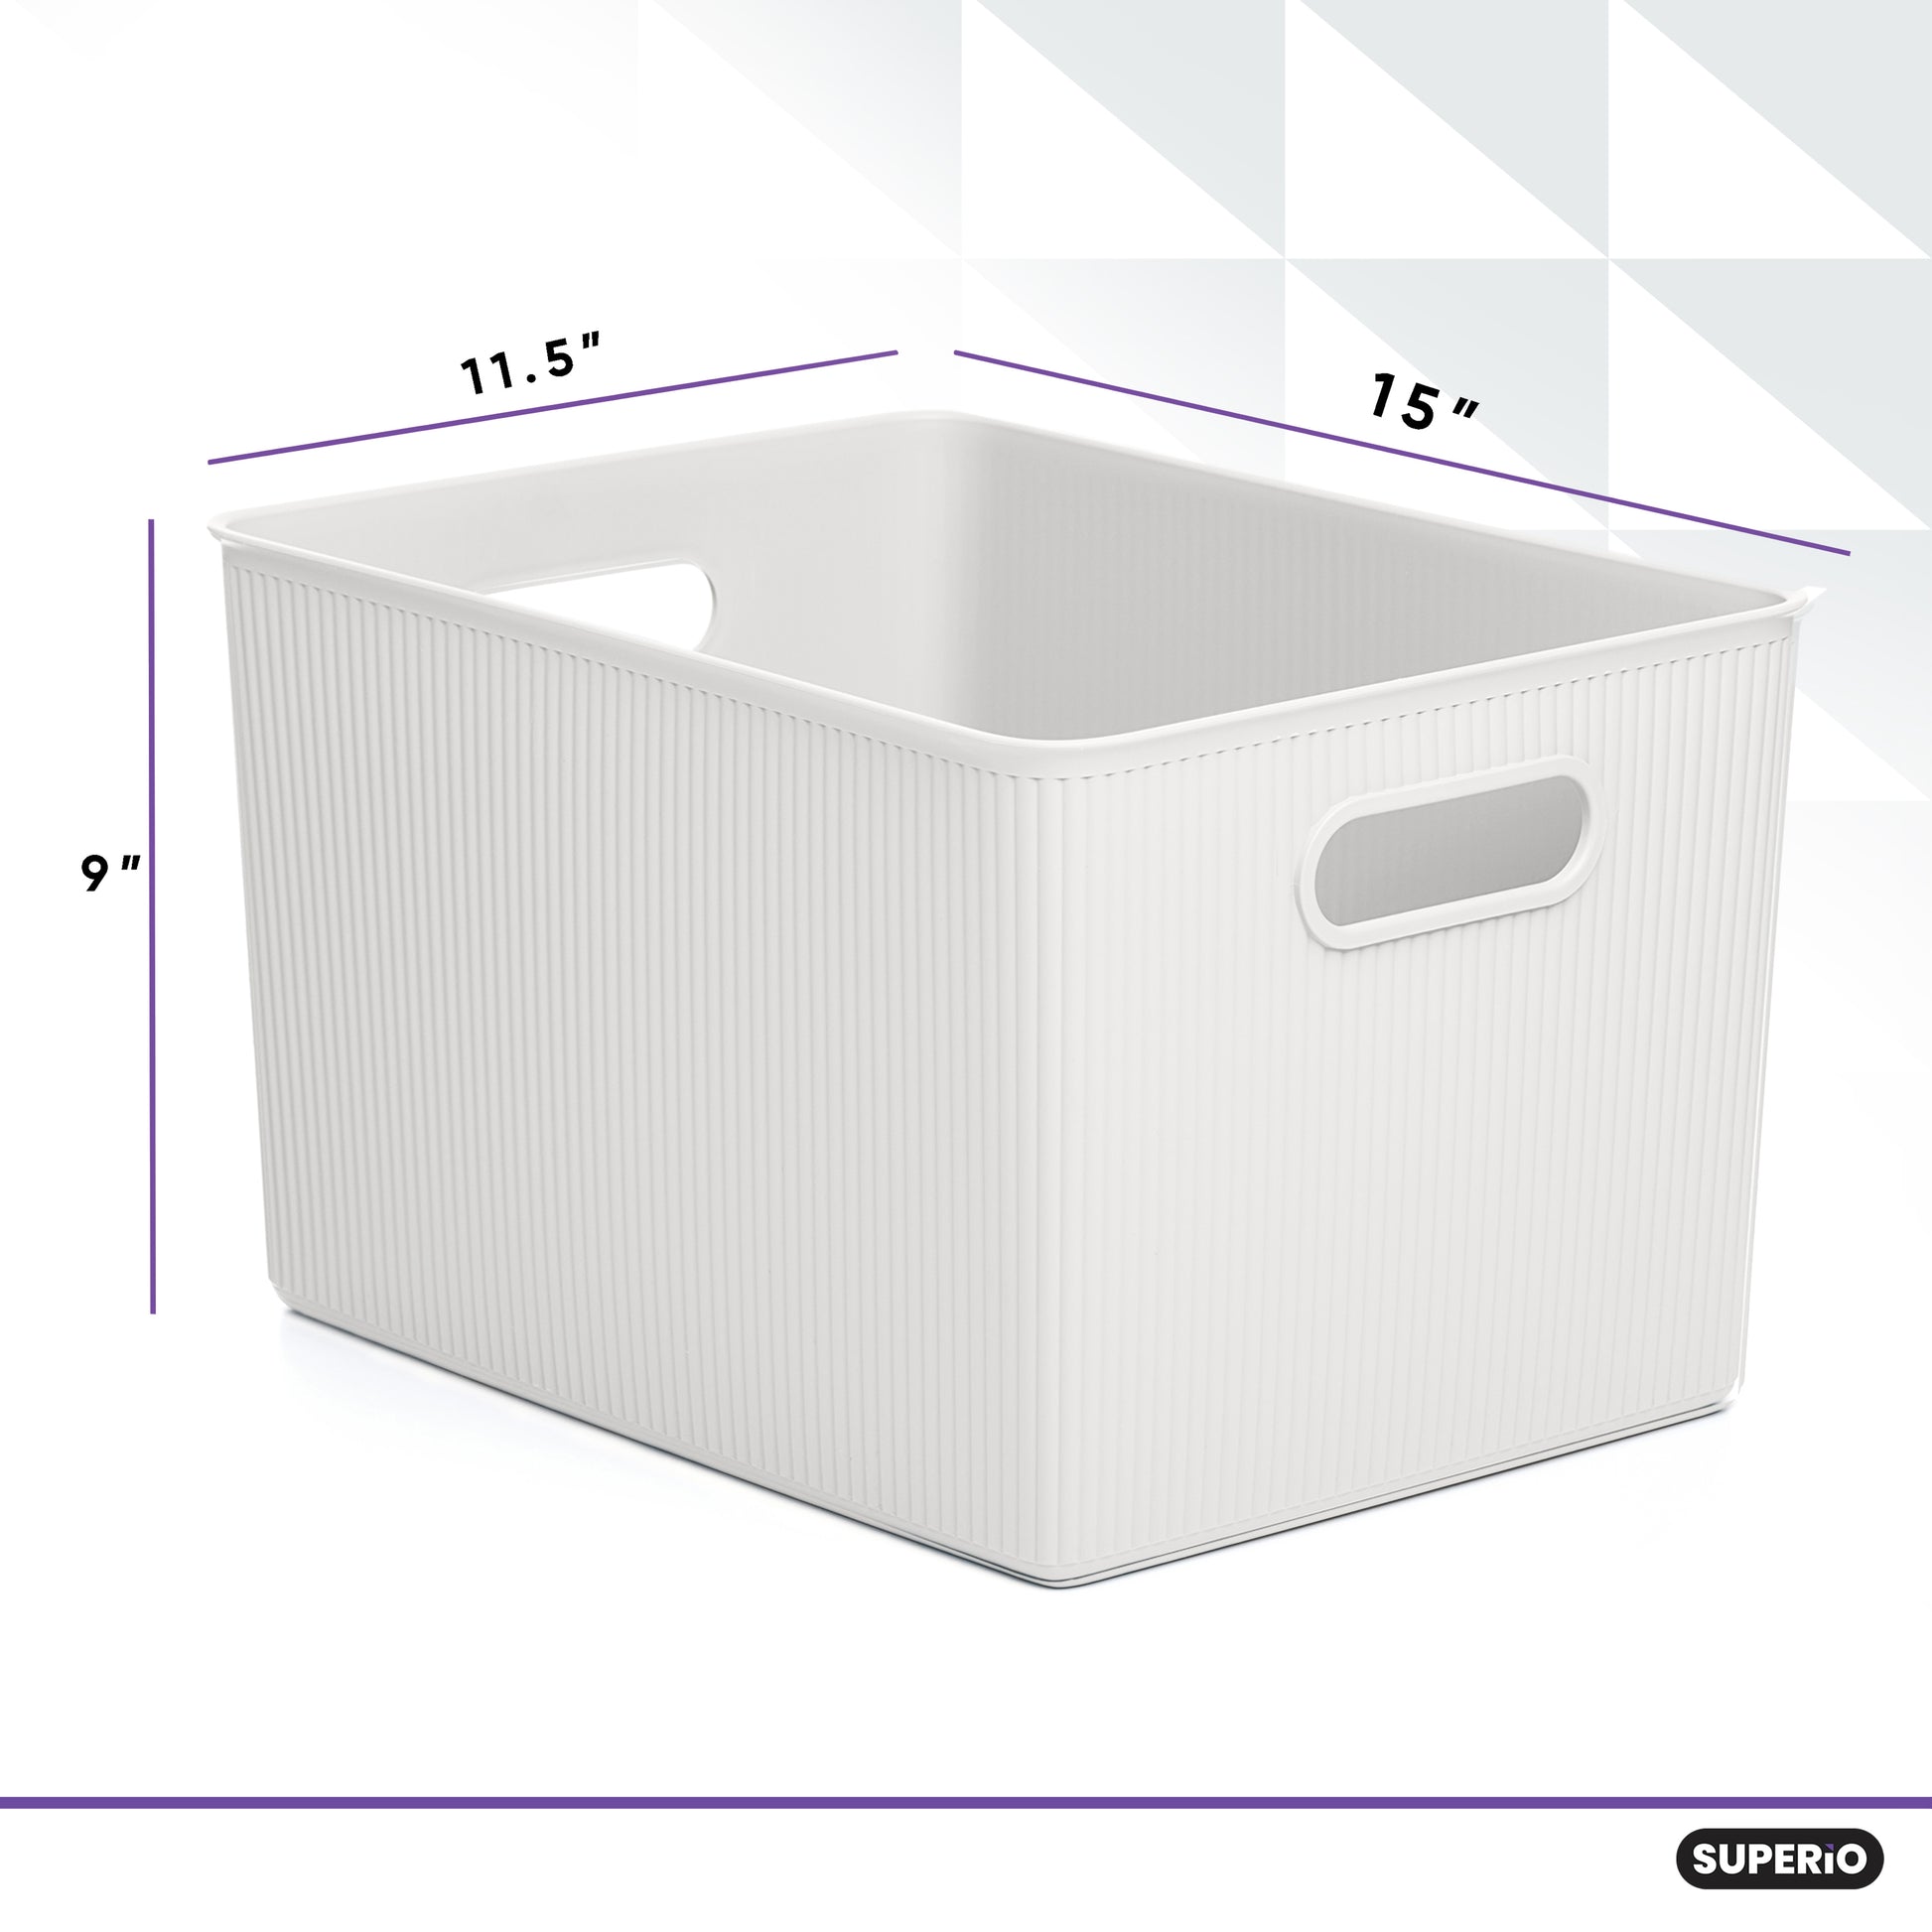 Superio Ribbed Collection - Decorative Plastic Lidded Home Storage Bins  Organizer Baskets, Large Lilac Purple (1 Pack - 15 Liter) Stackable  Container